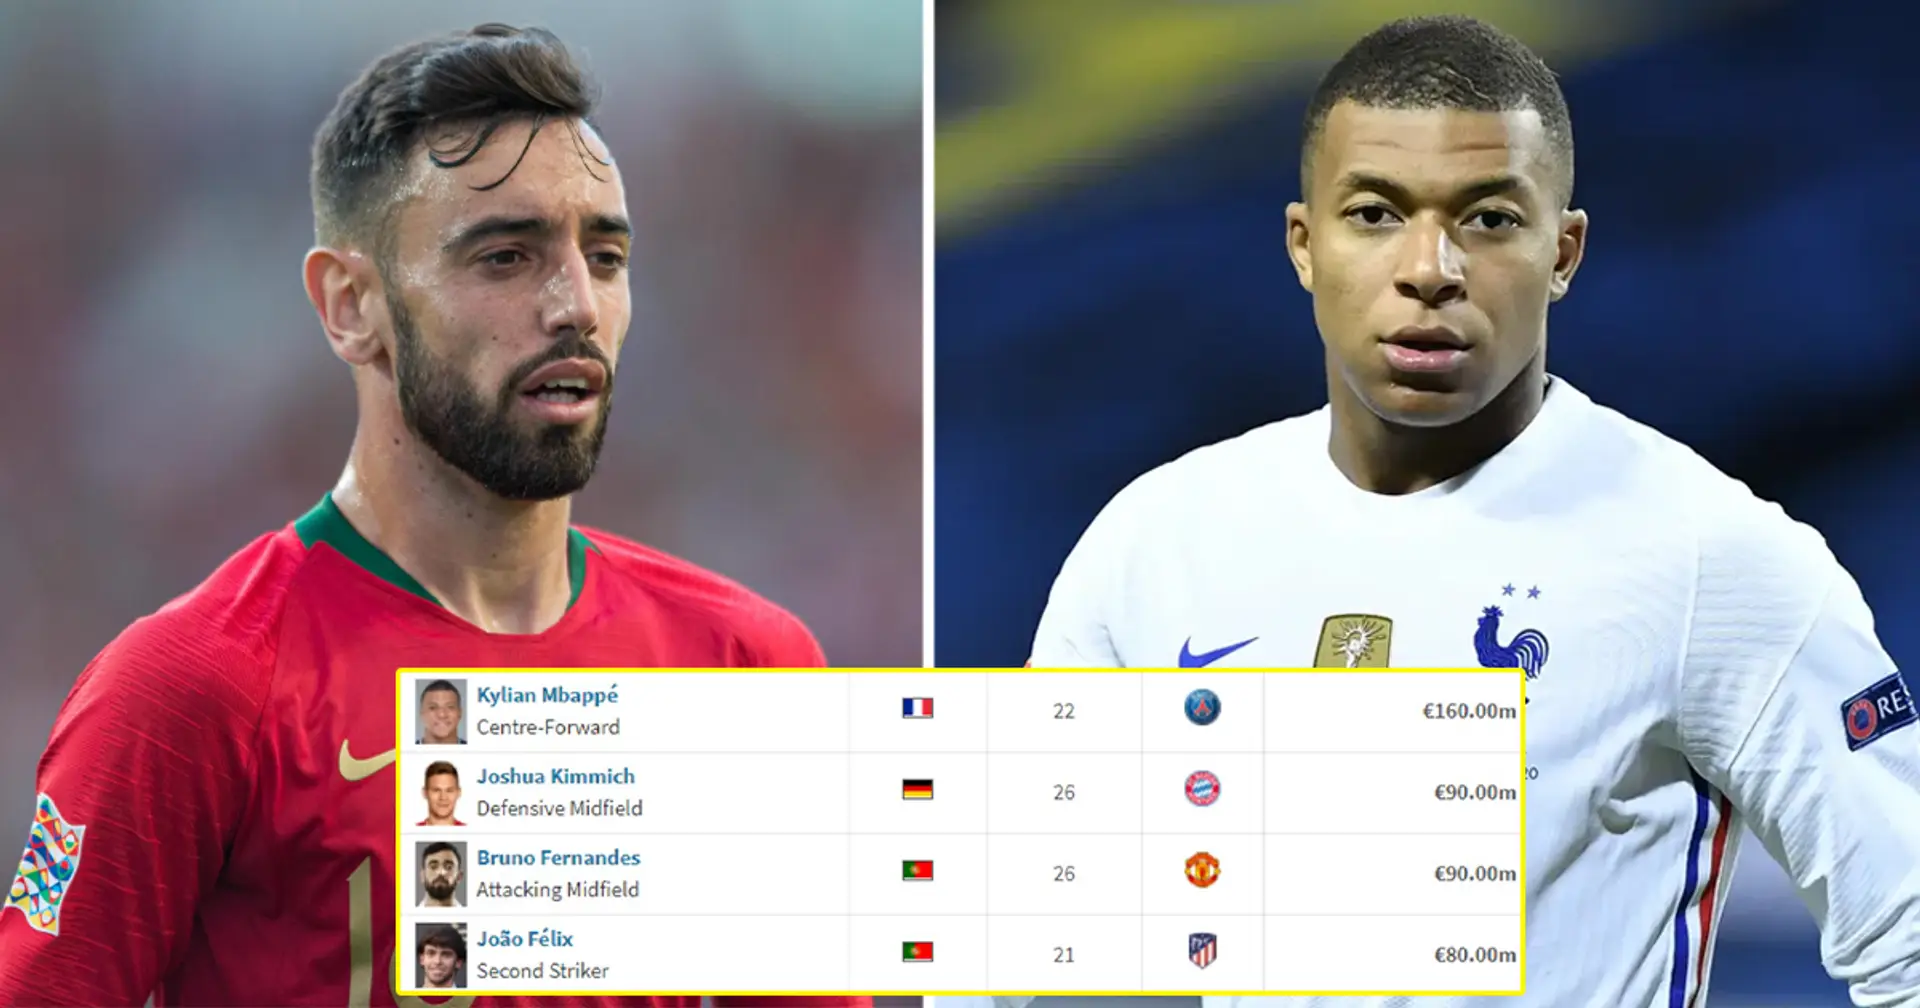 2 United players ranked among top 15 players in Euro 2020 'group of death' by market value